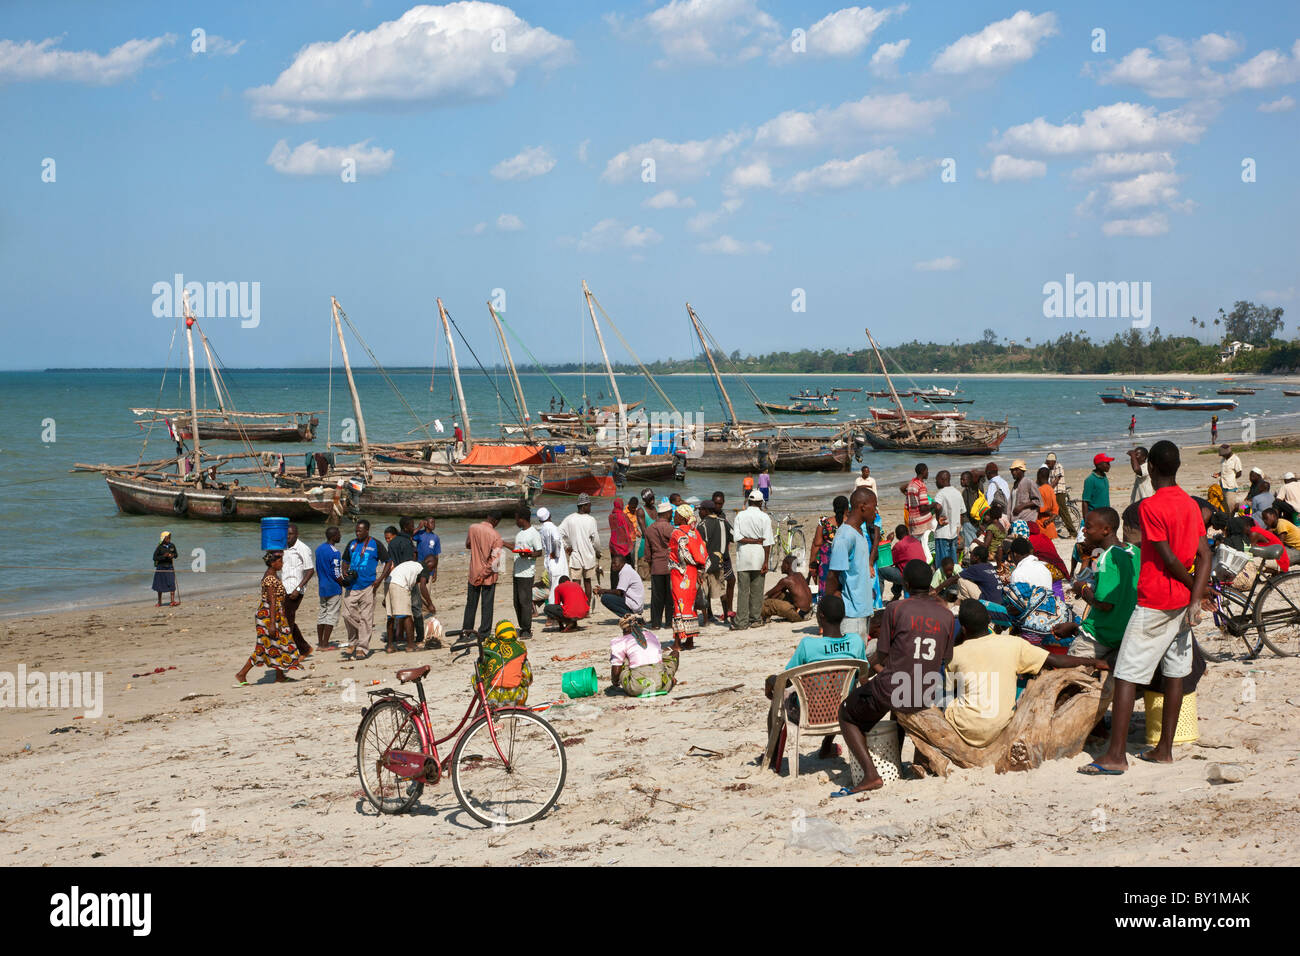 The busy harbour at Bagamoyo where fishermen land their catches and motorised dhows from Zanzibar off-load merchandise. Stock Photo